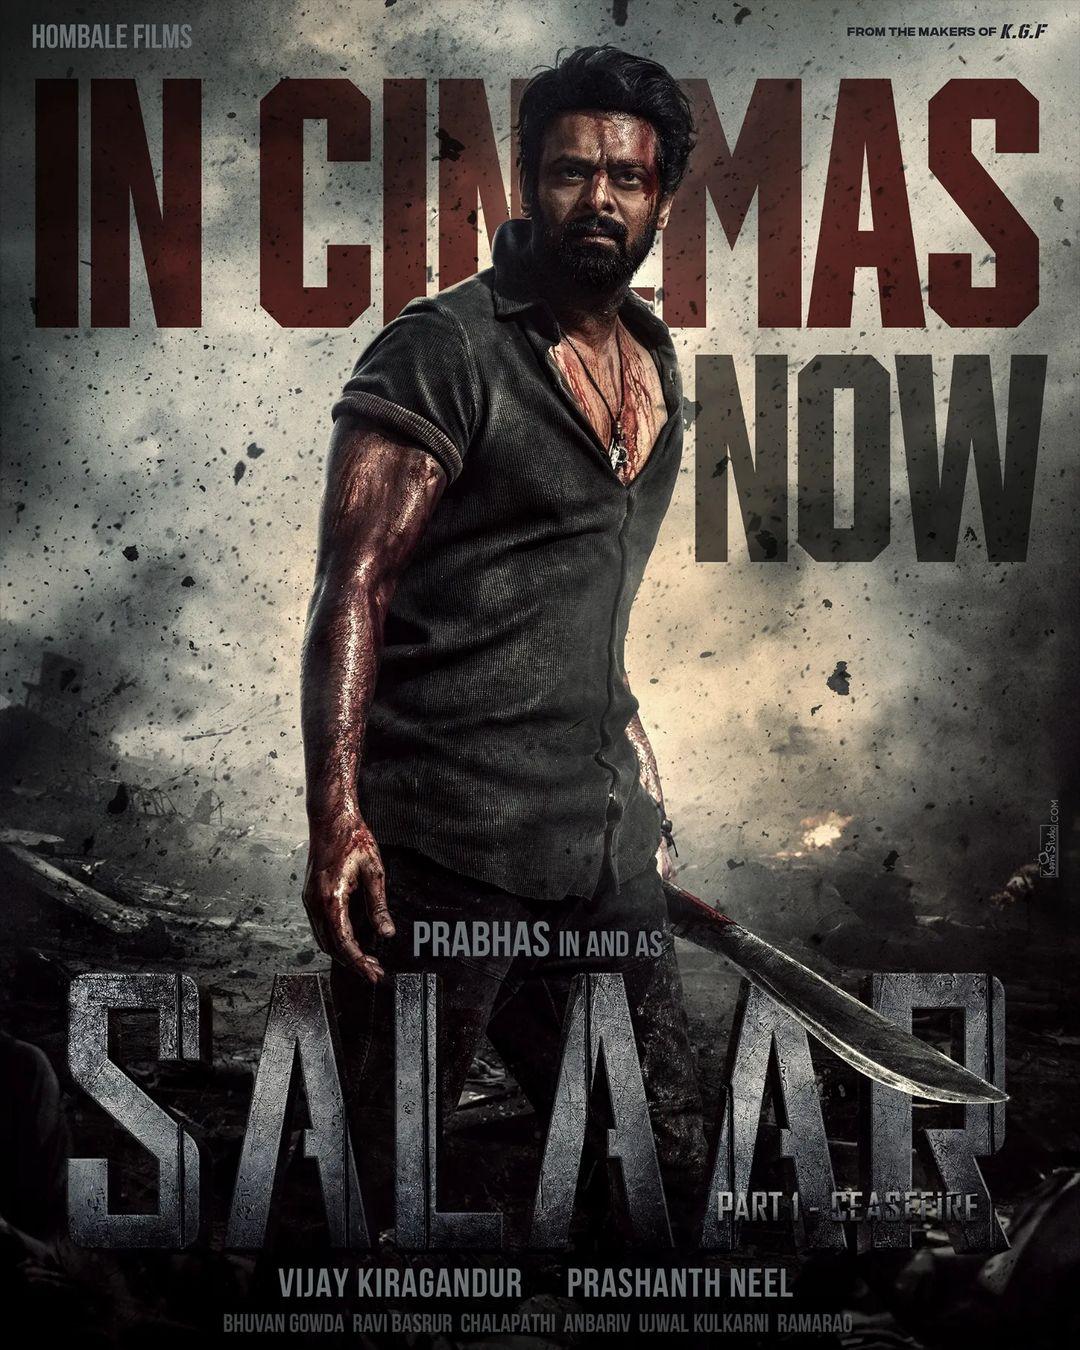 Salaar: Part 1 – Ceasefire has arrived in the cinemas today and opened to a roaring response from all across the country